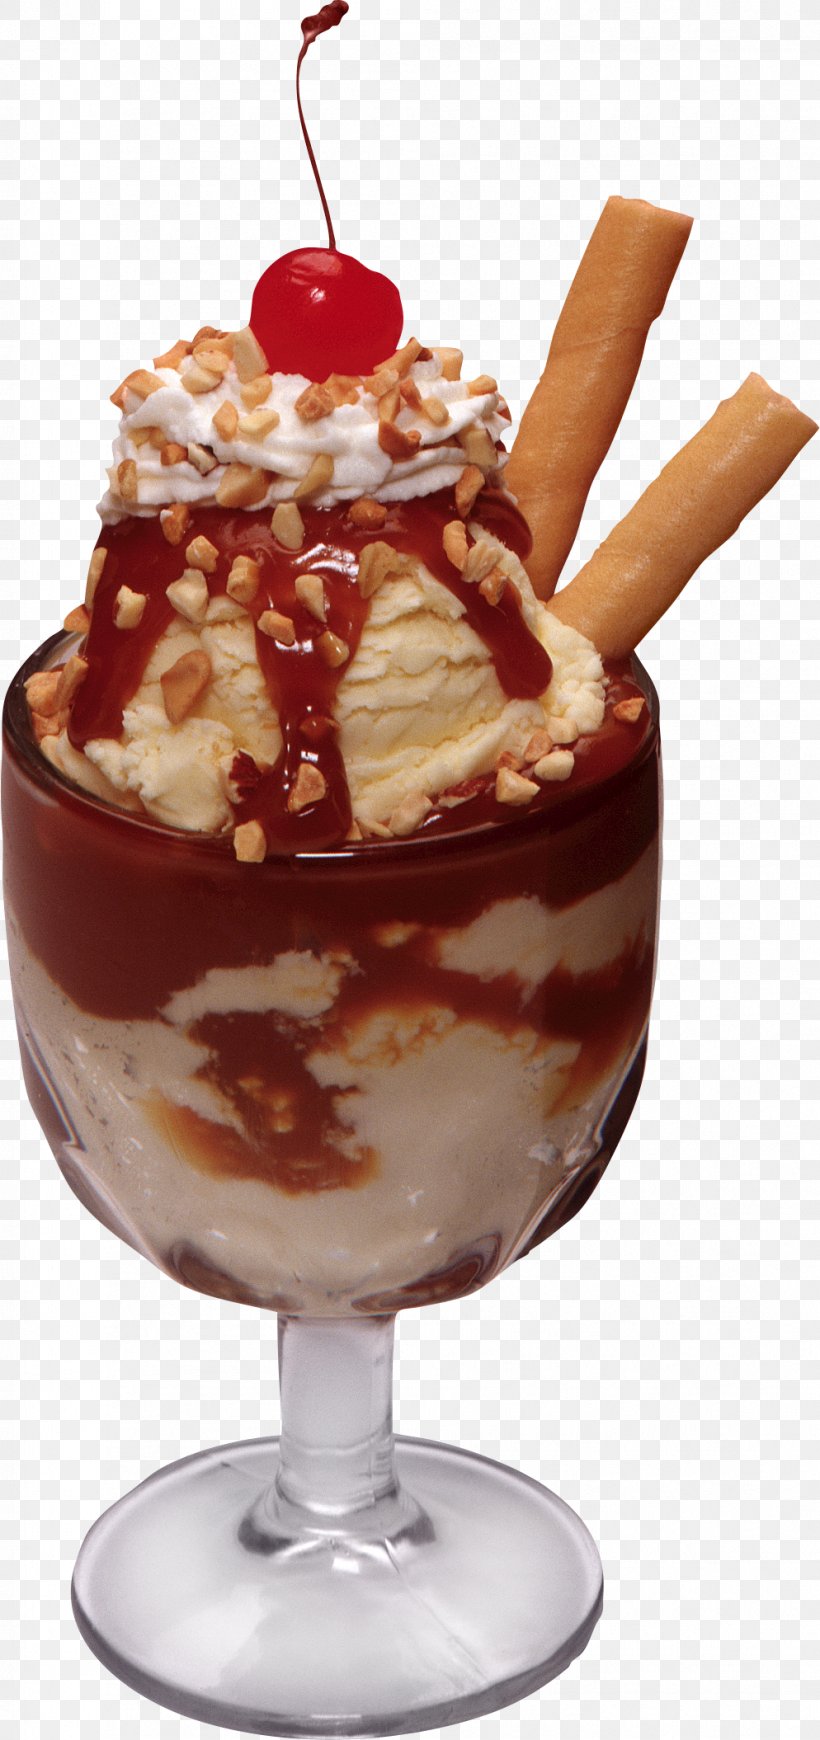 Ice Cream Cone Sundae Cupcake, PNG, 994x2110px, Ice Cream, Biscuits, Chocolate, Chocolate Ice Cream, Chocolate Syrup Download Free